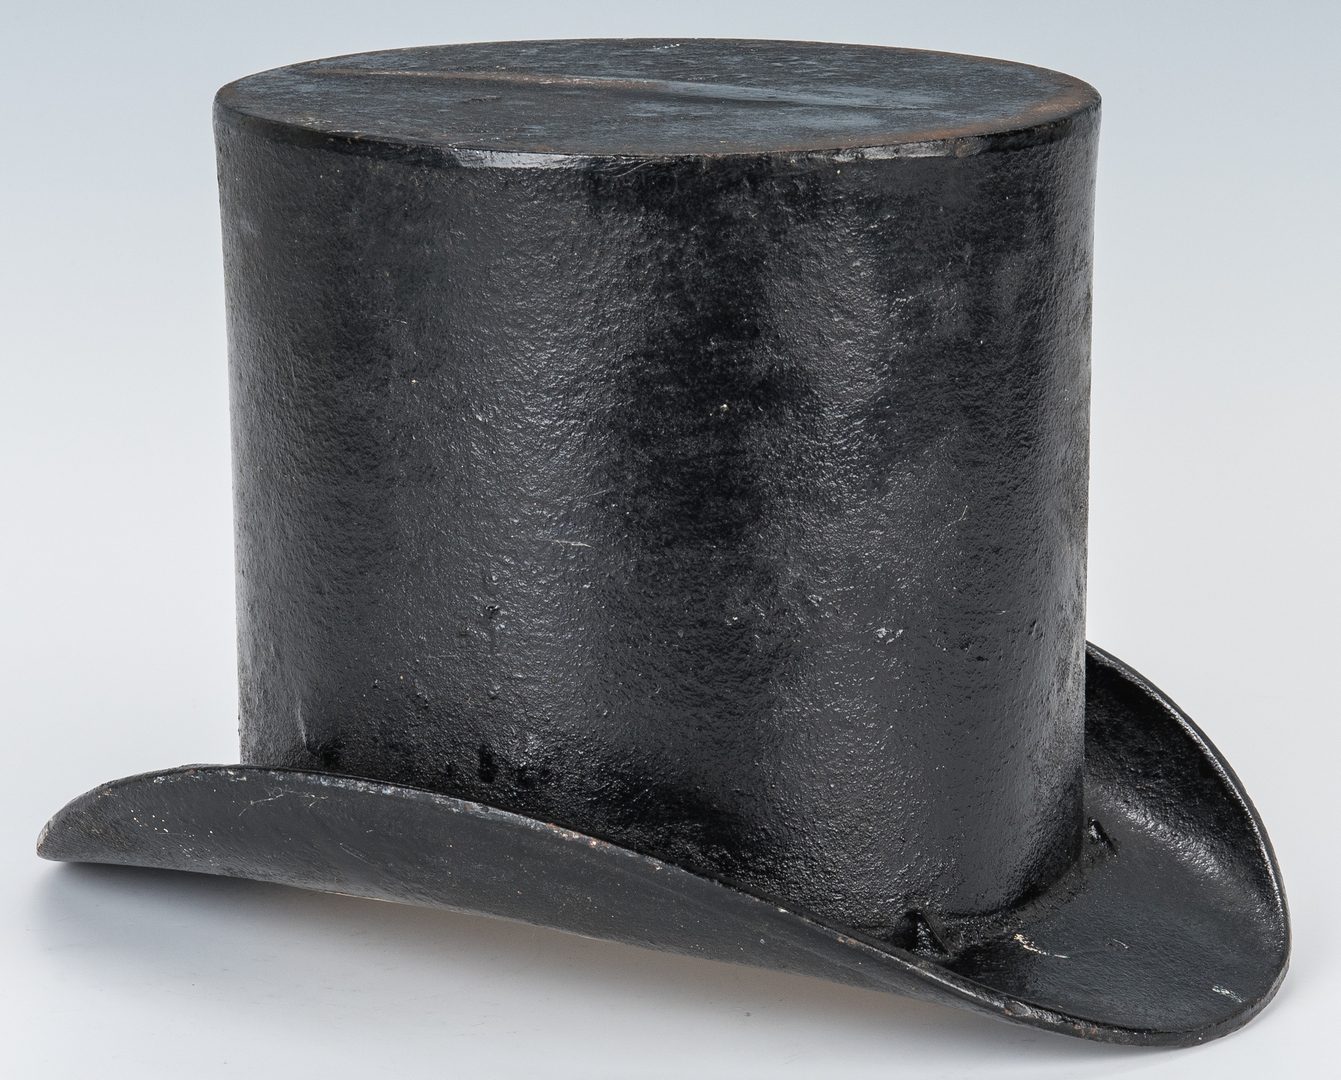 Lot 108: Cast Iron Top Hat Spittoon or Planter